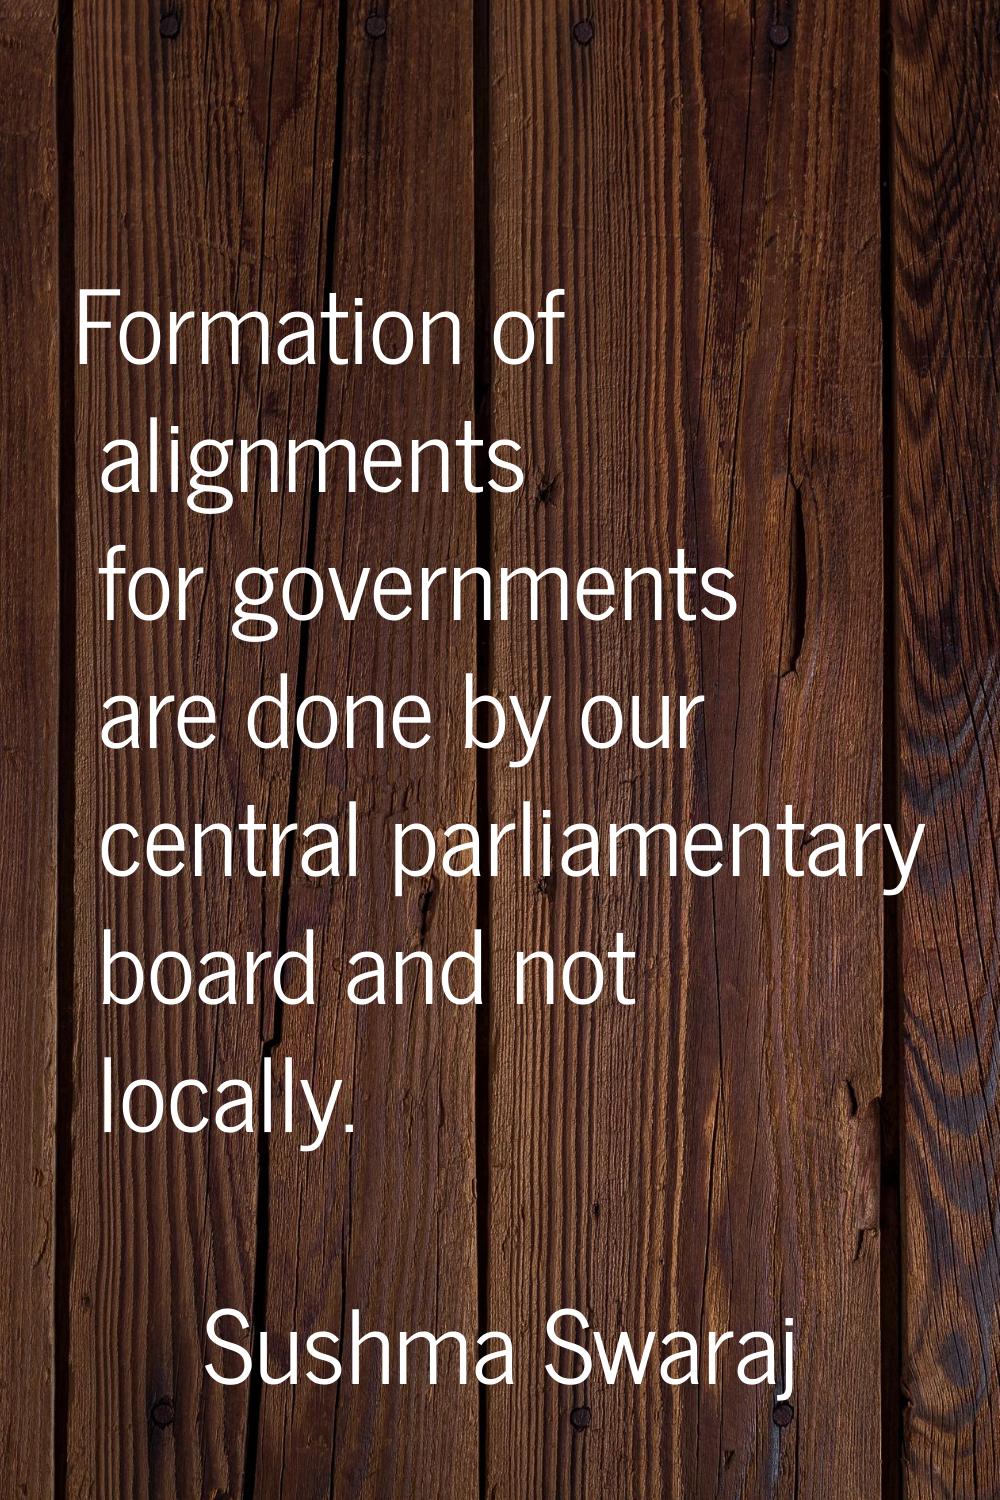 Formation of alignments for governments are done by our central parliamentary board and not locally